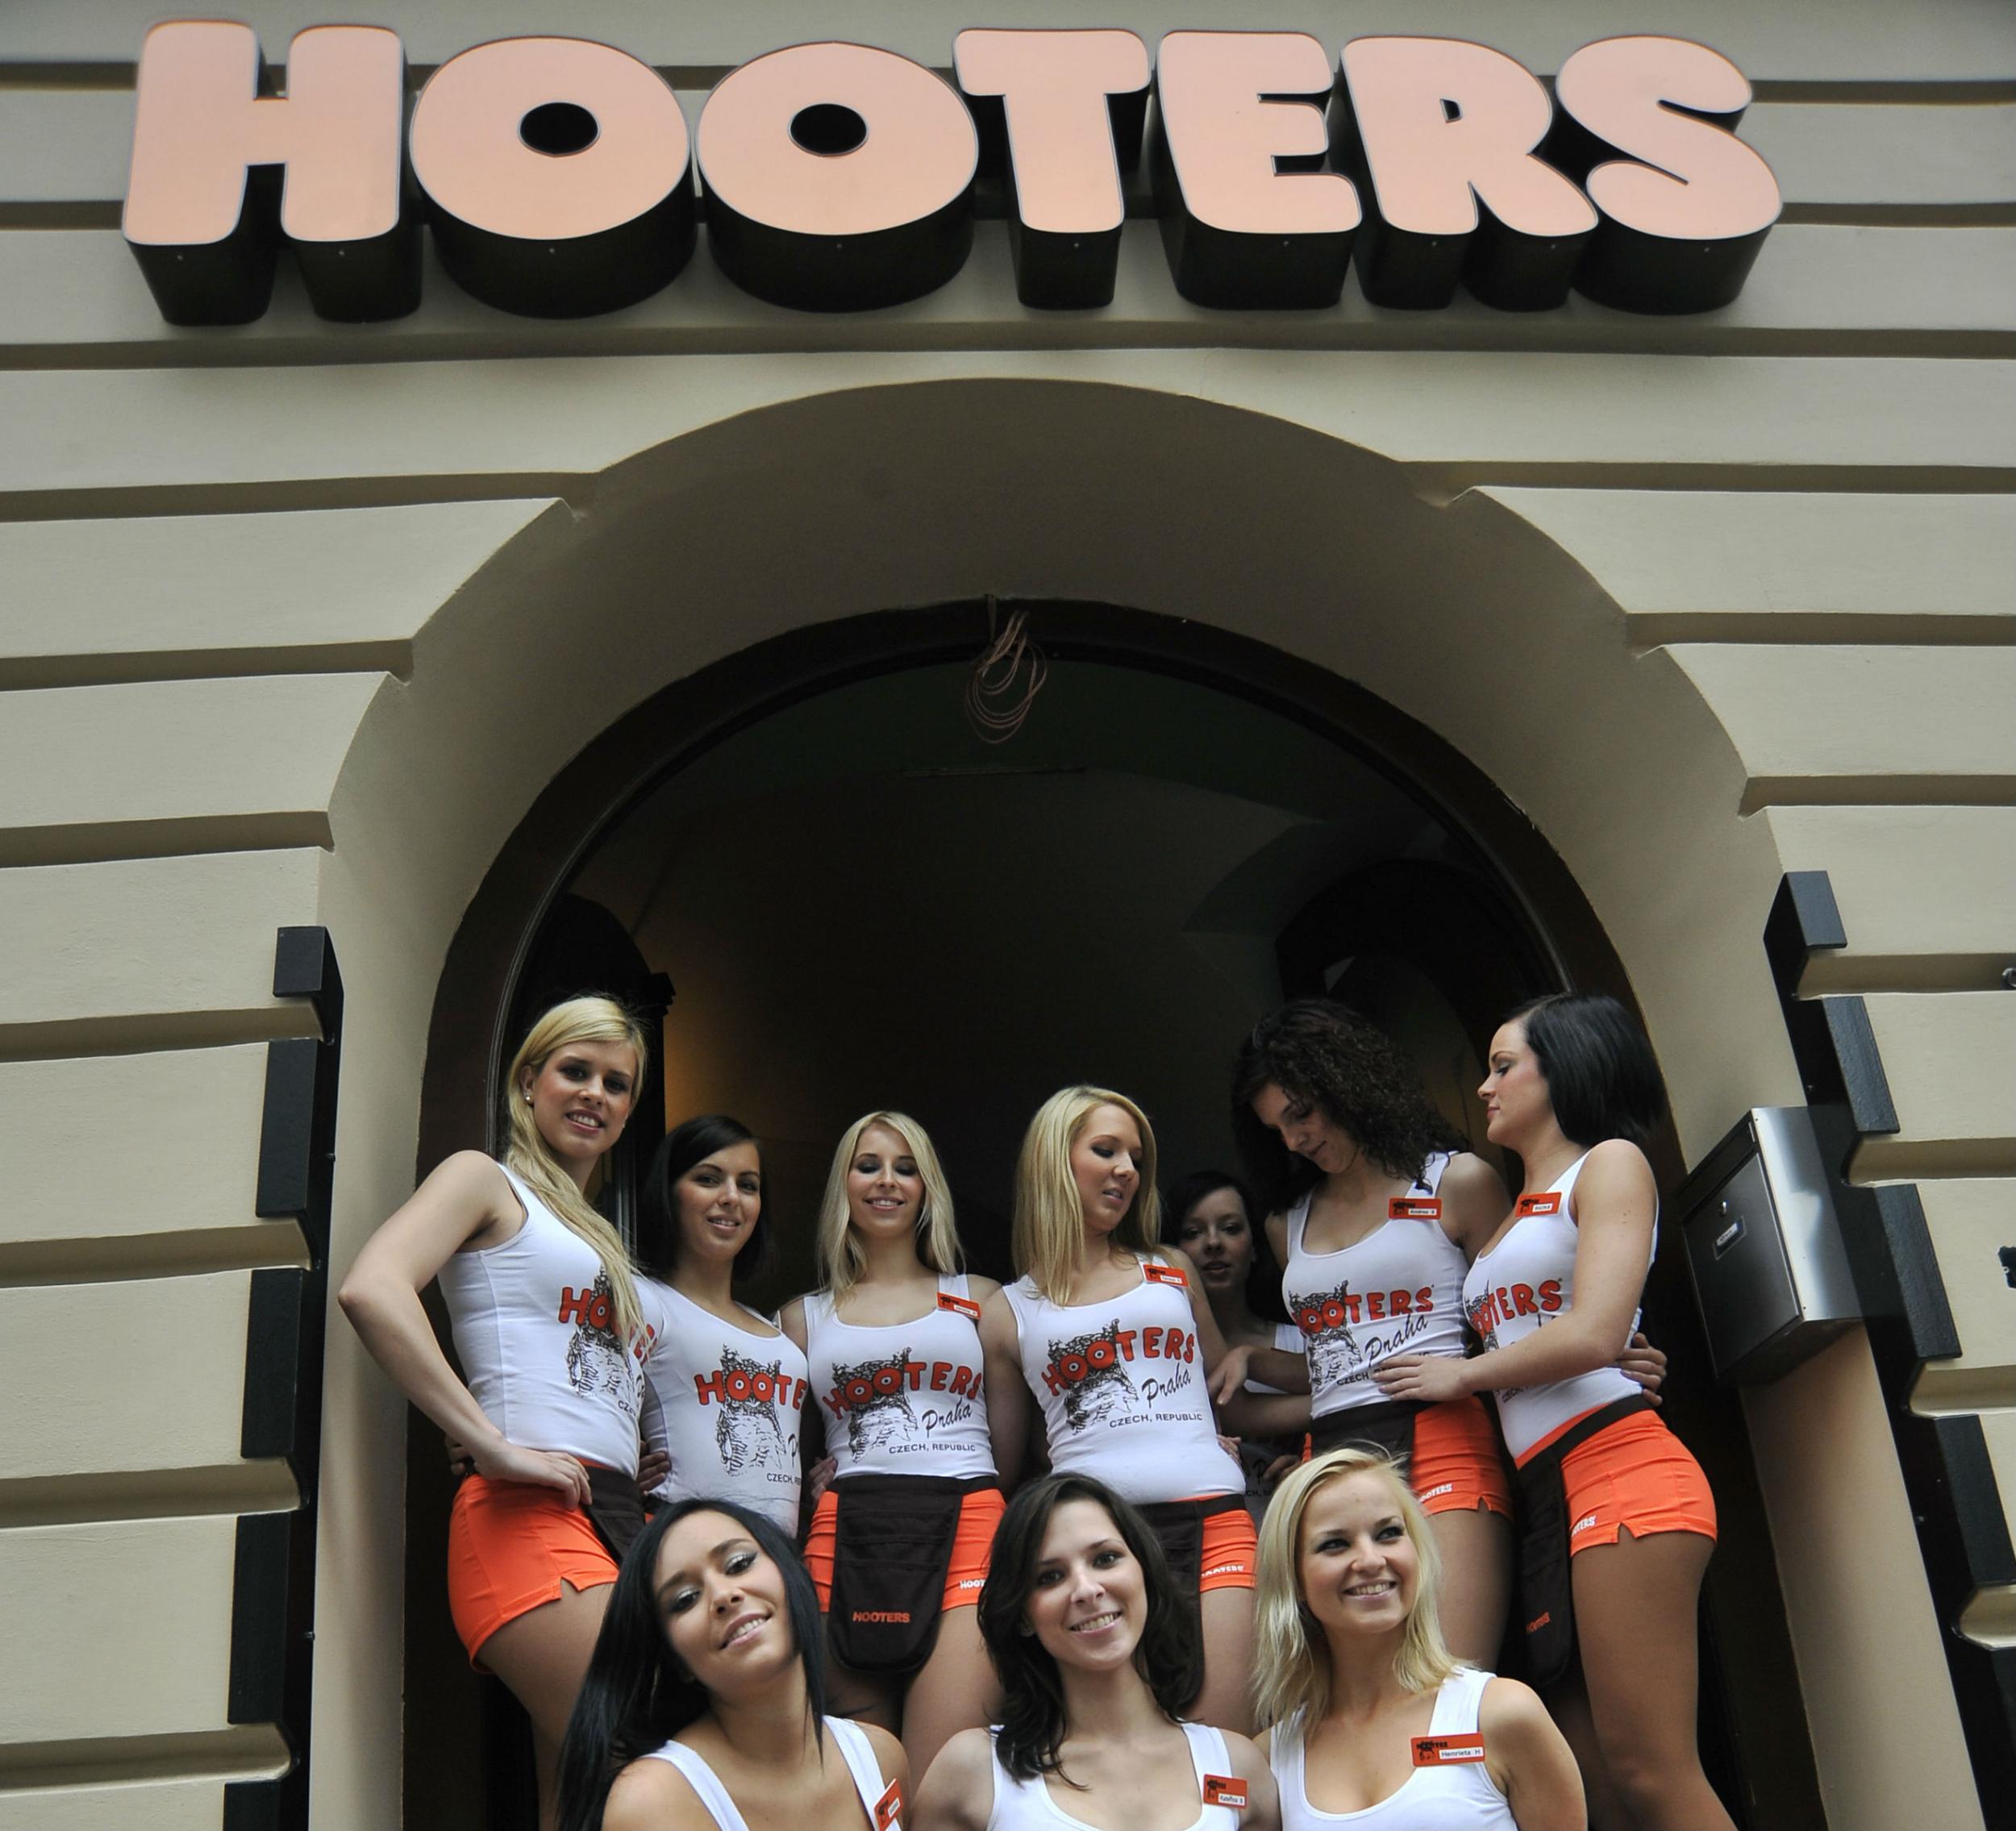 Hooters staff are notorious for their outfits